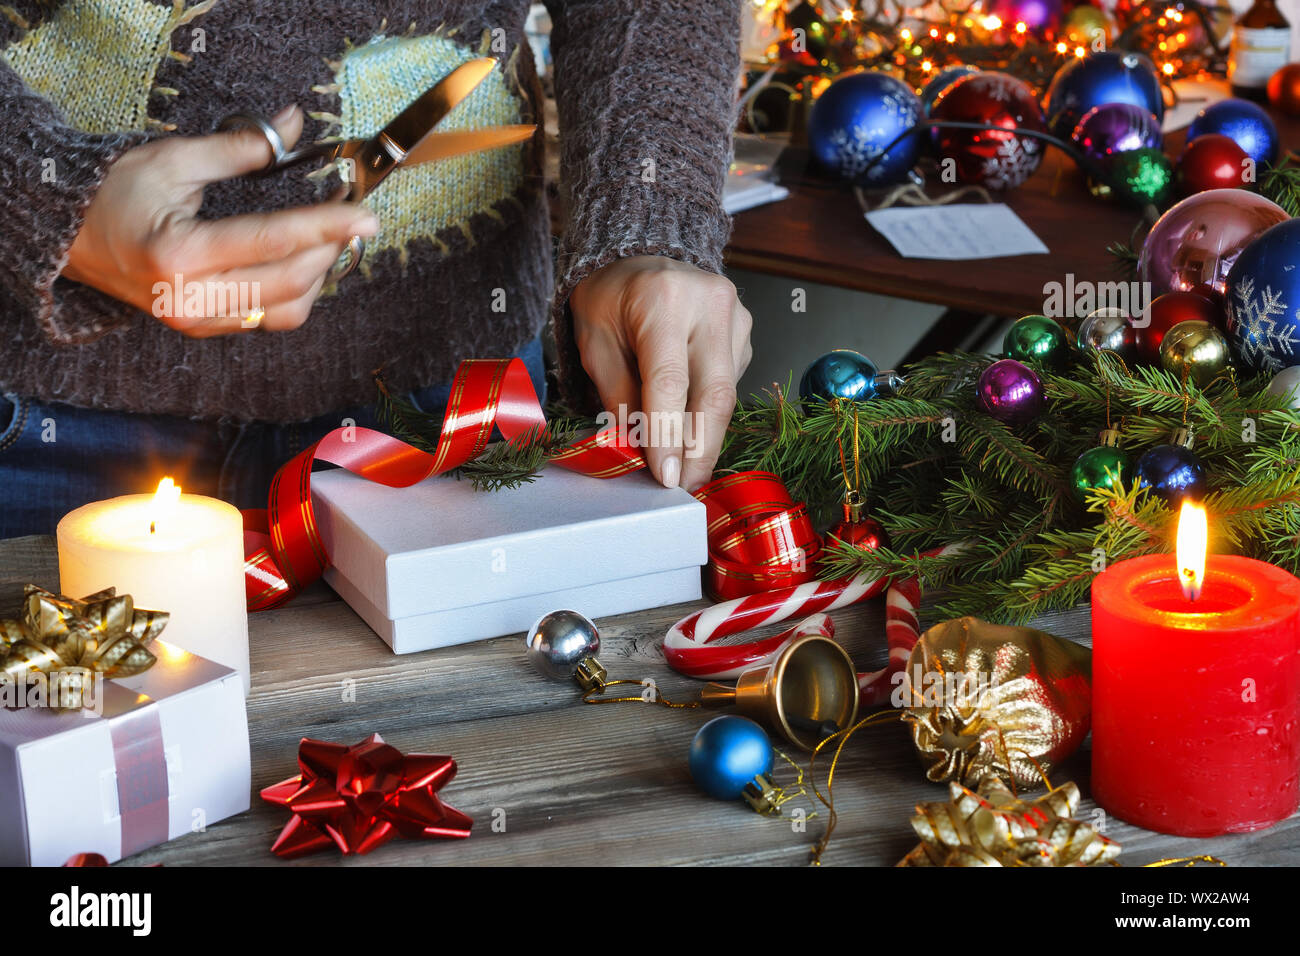 New Year's gifts, New Year 2019, Woman prepares New Year's gifts Stock Photo